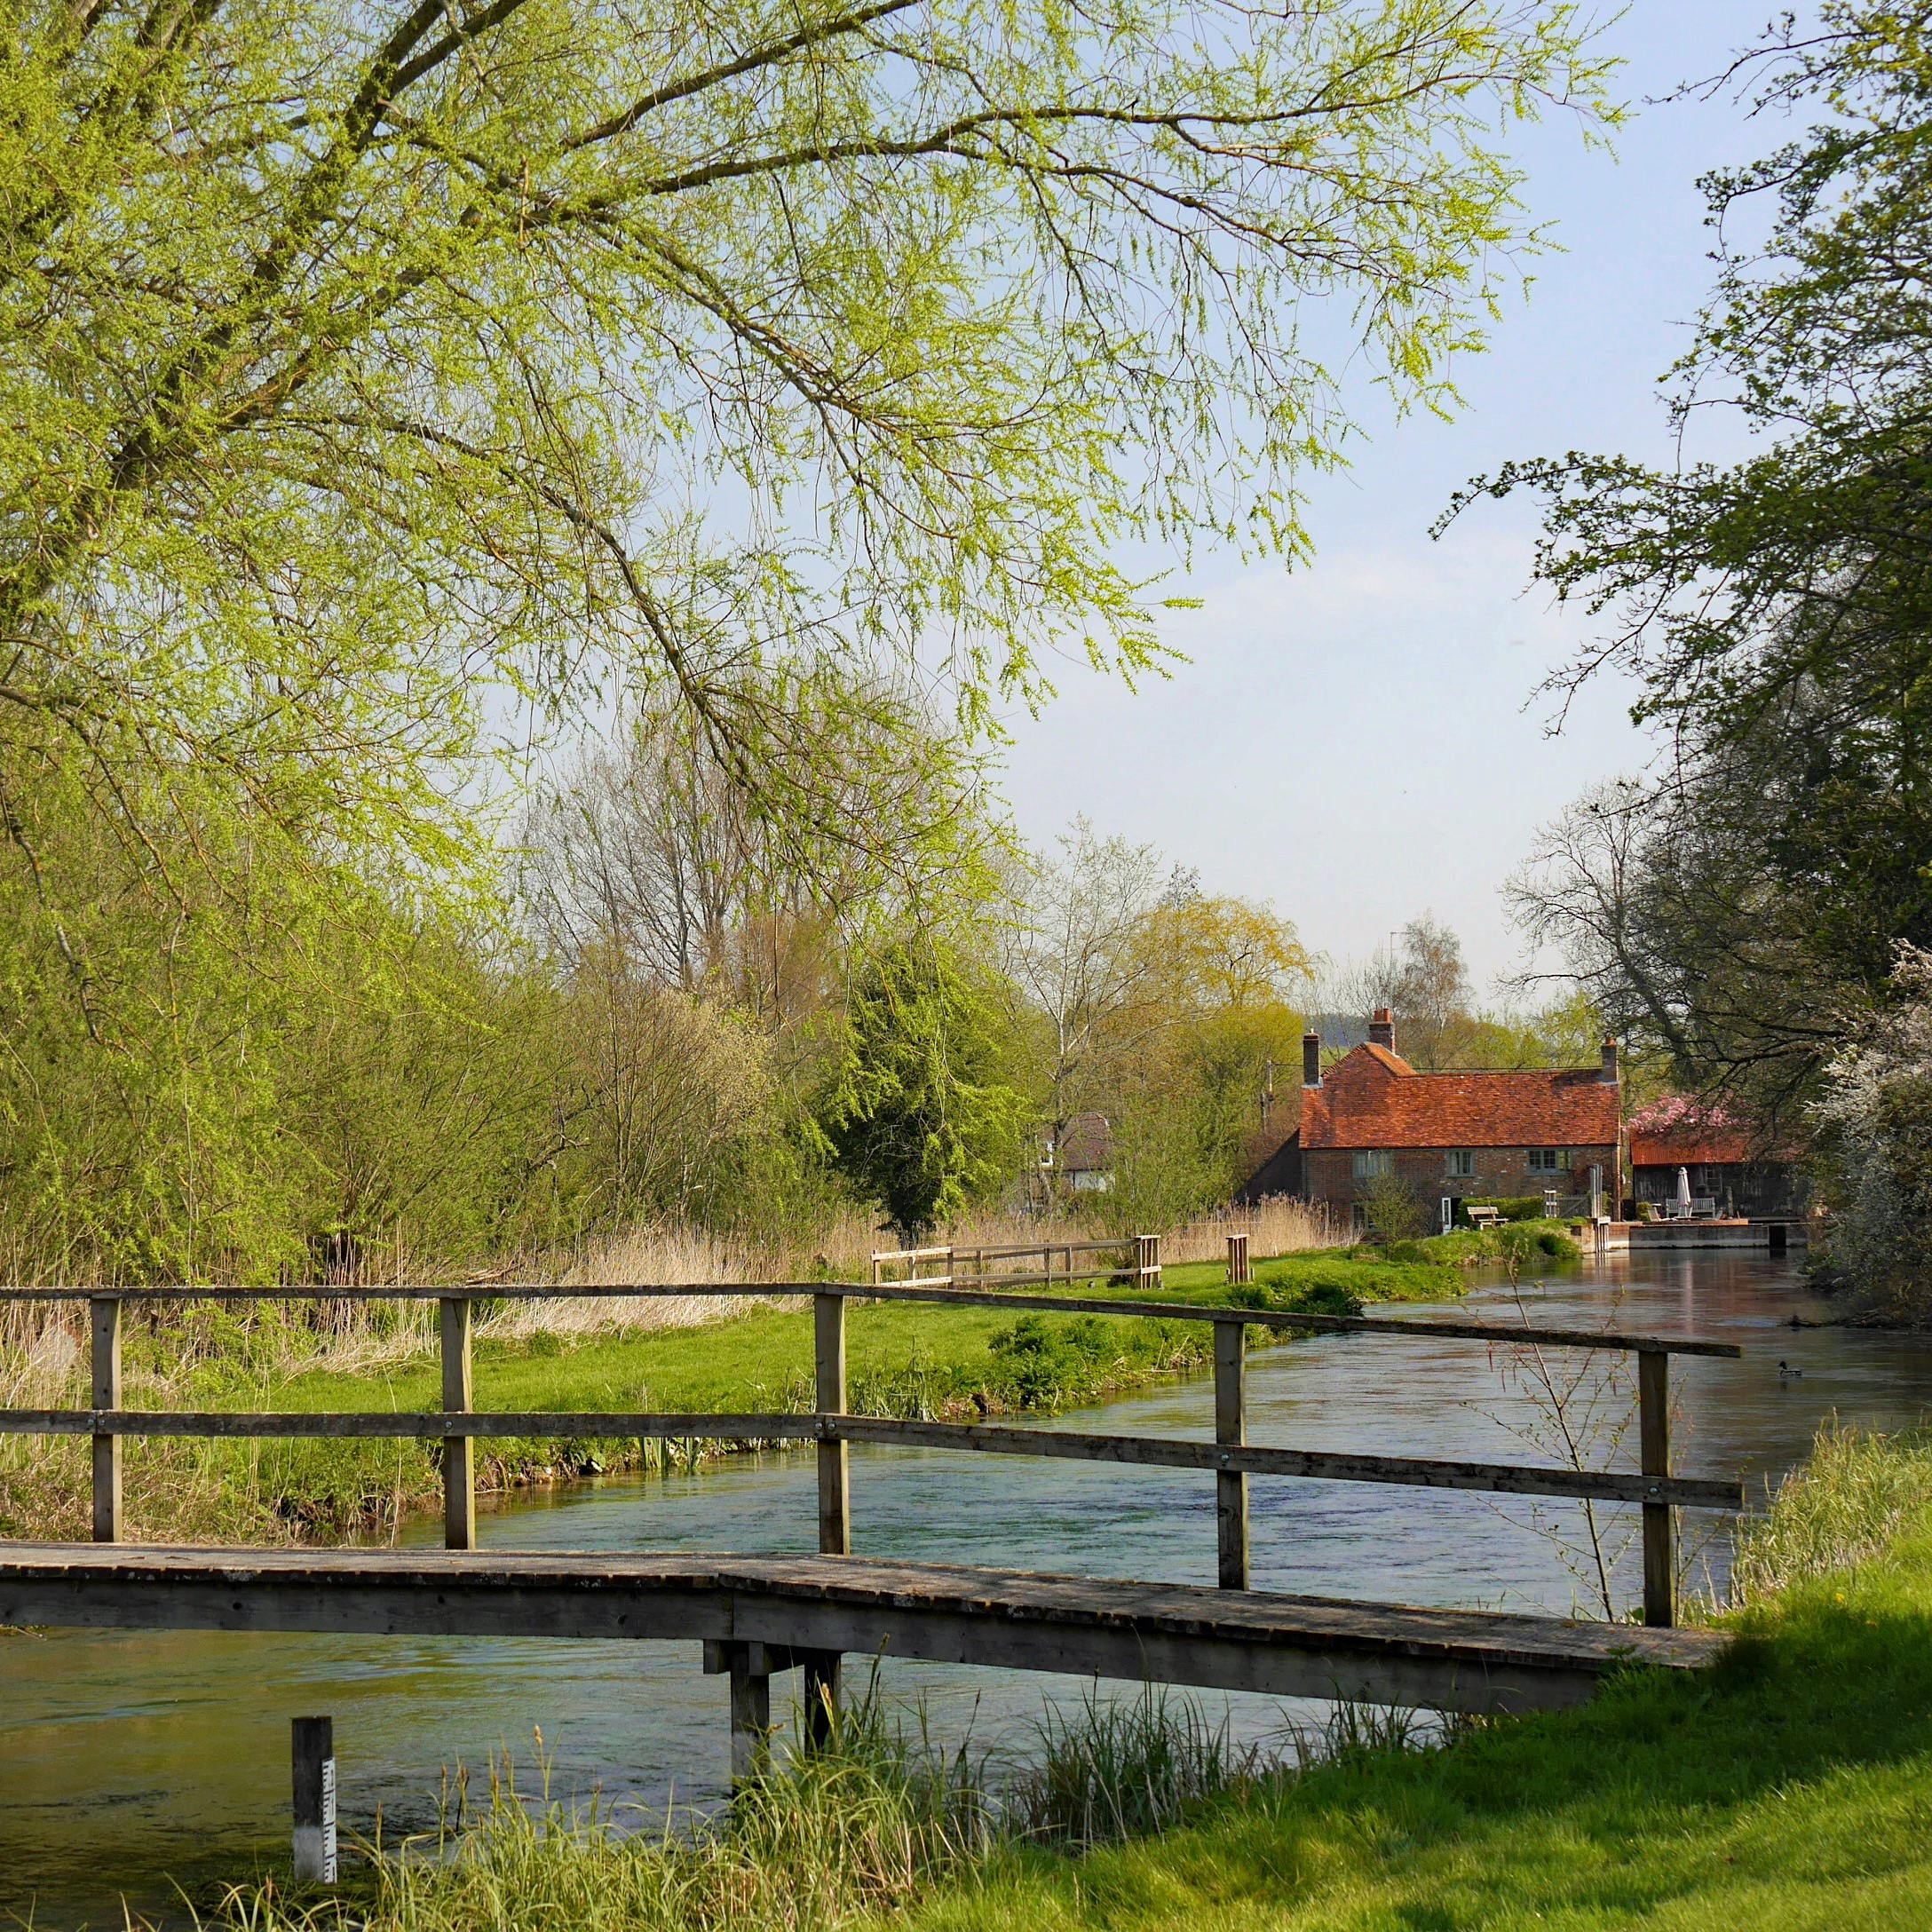  The Kennet at Stitchcombe